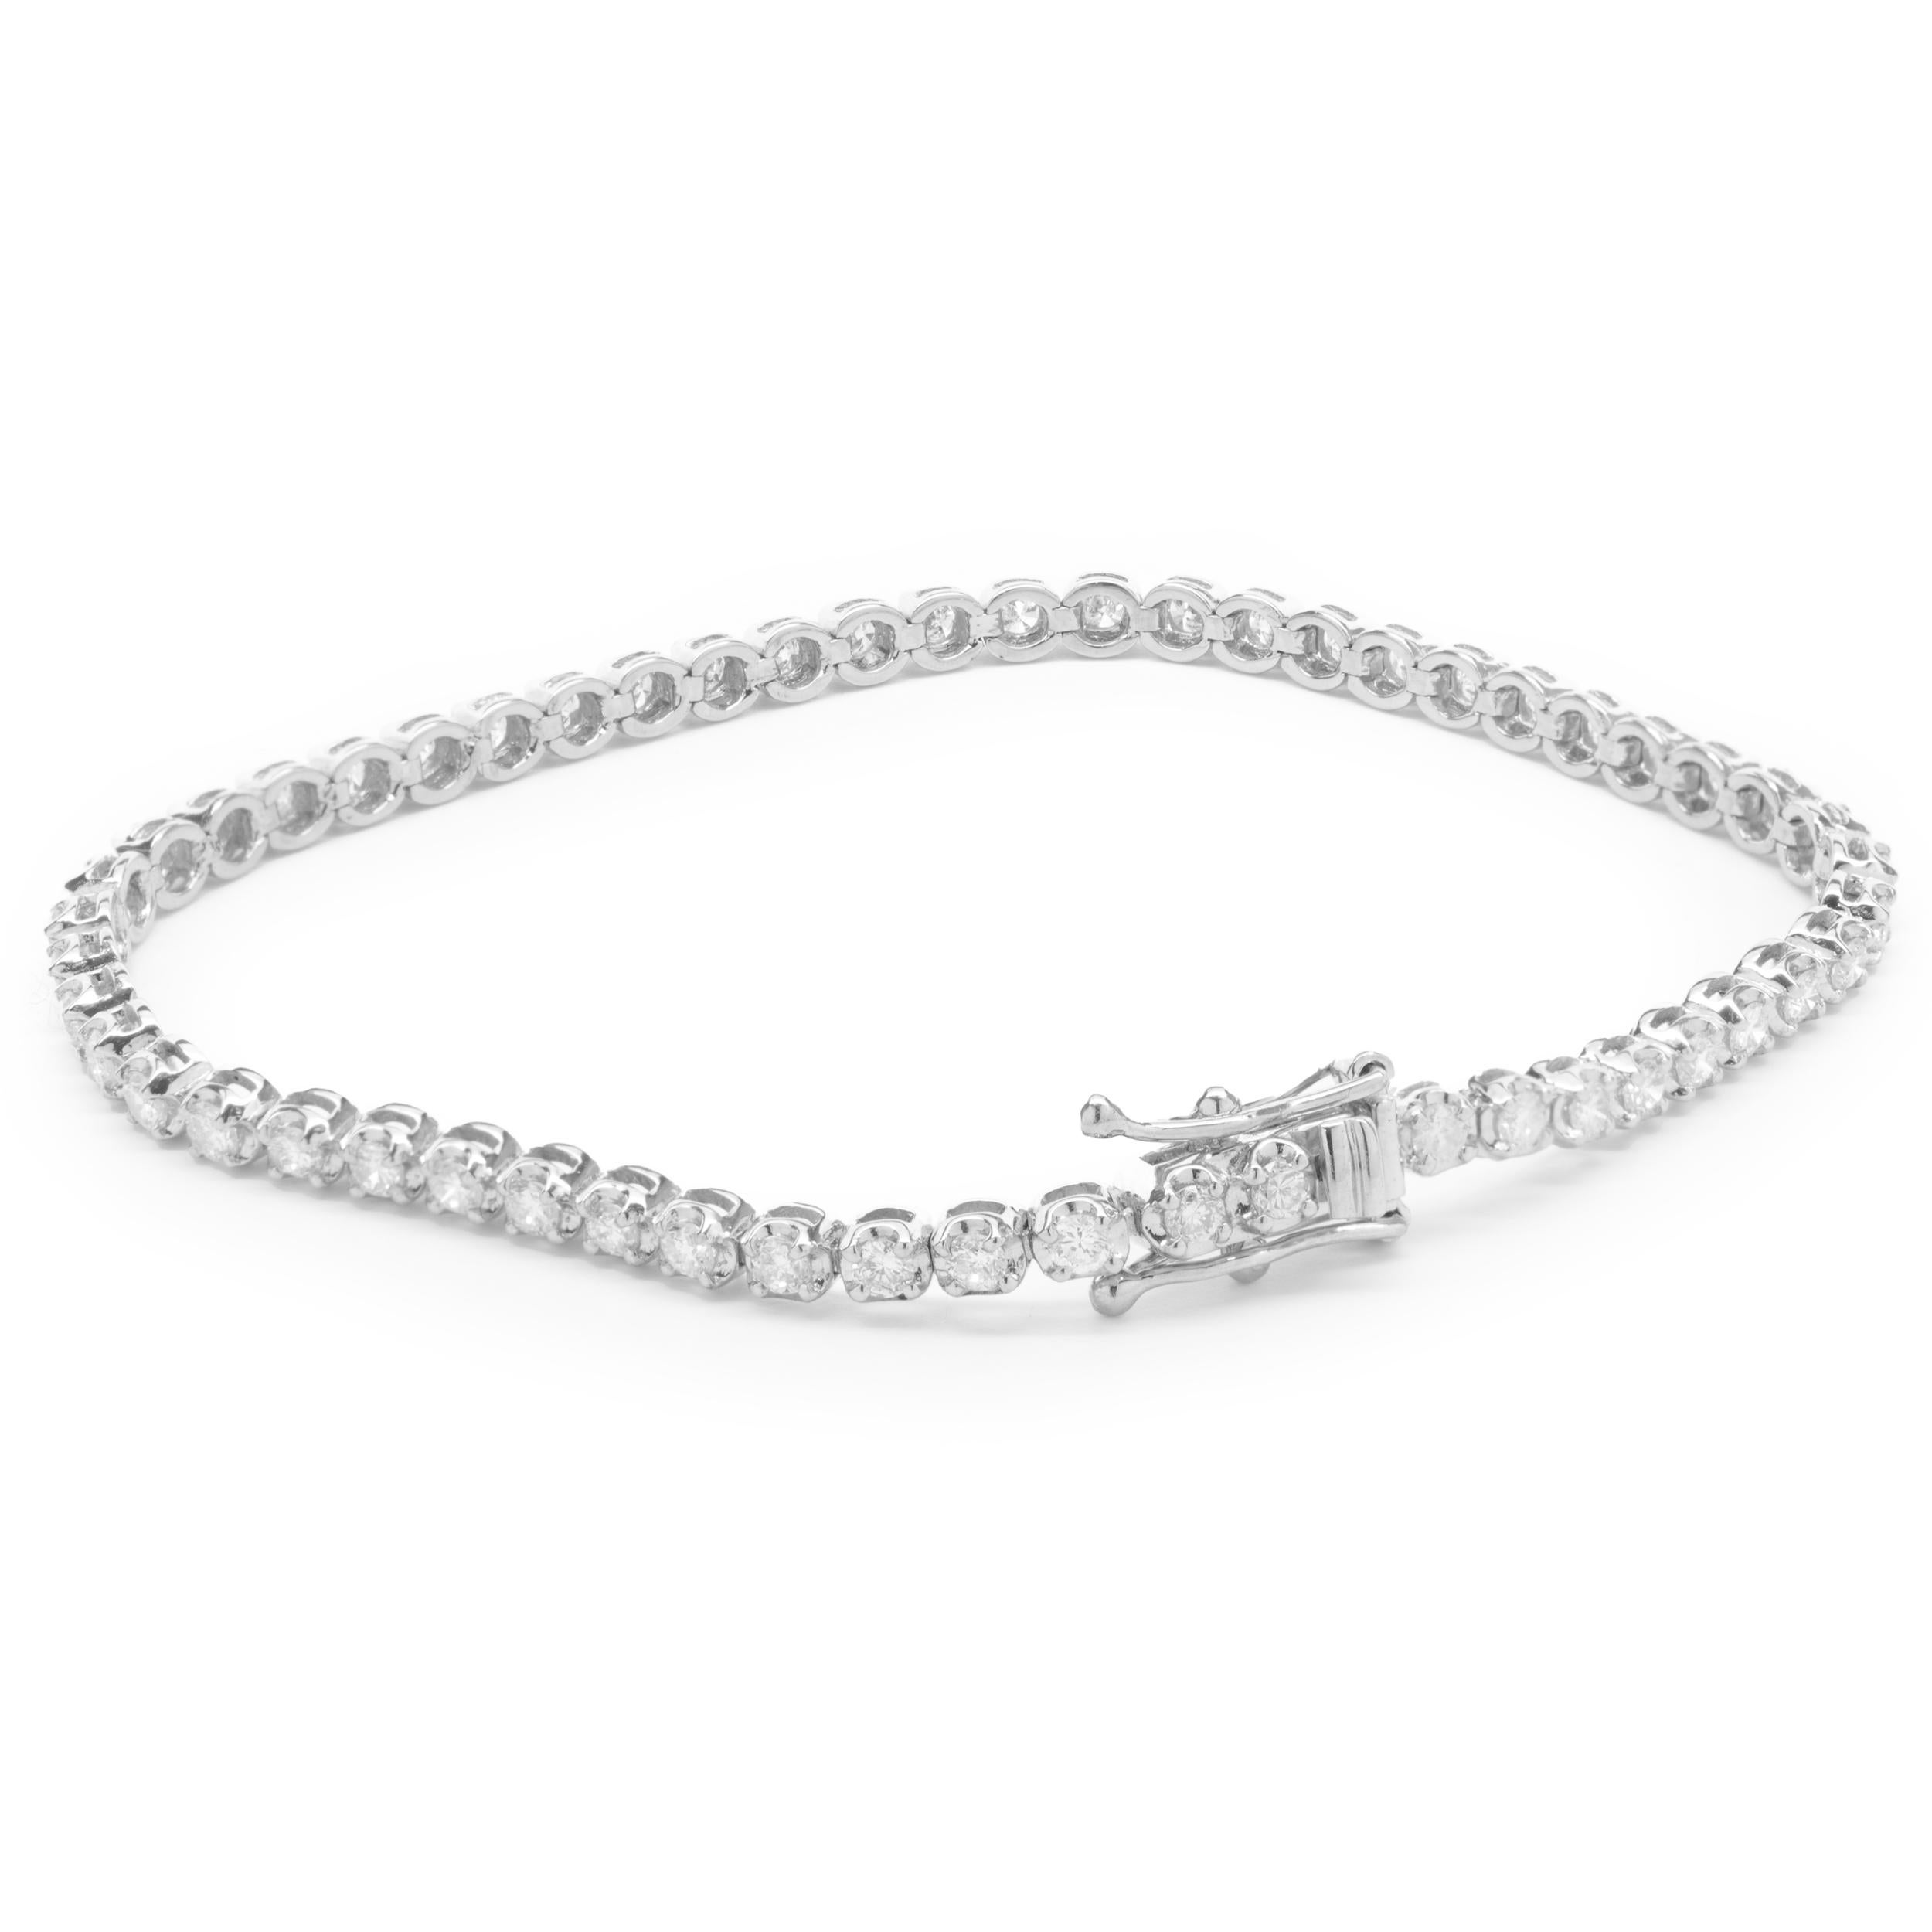 Designer: custom 
Material: 14K white gold
Diamond: 54 round brilliant cut = 1.50cttw
Color:  G
Clarity: SI1
Dimensions: bracelet will fit up to a 6.5-inch wrist
Weight: 6.50grams